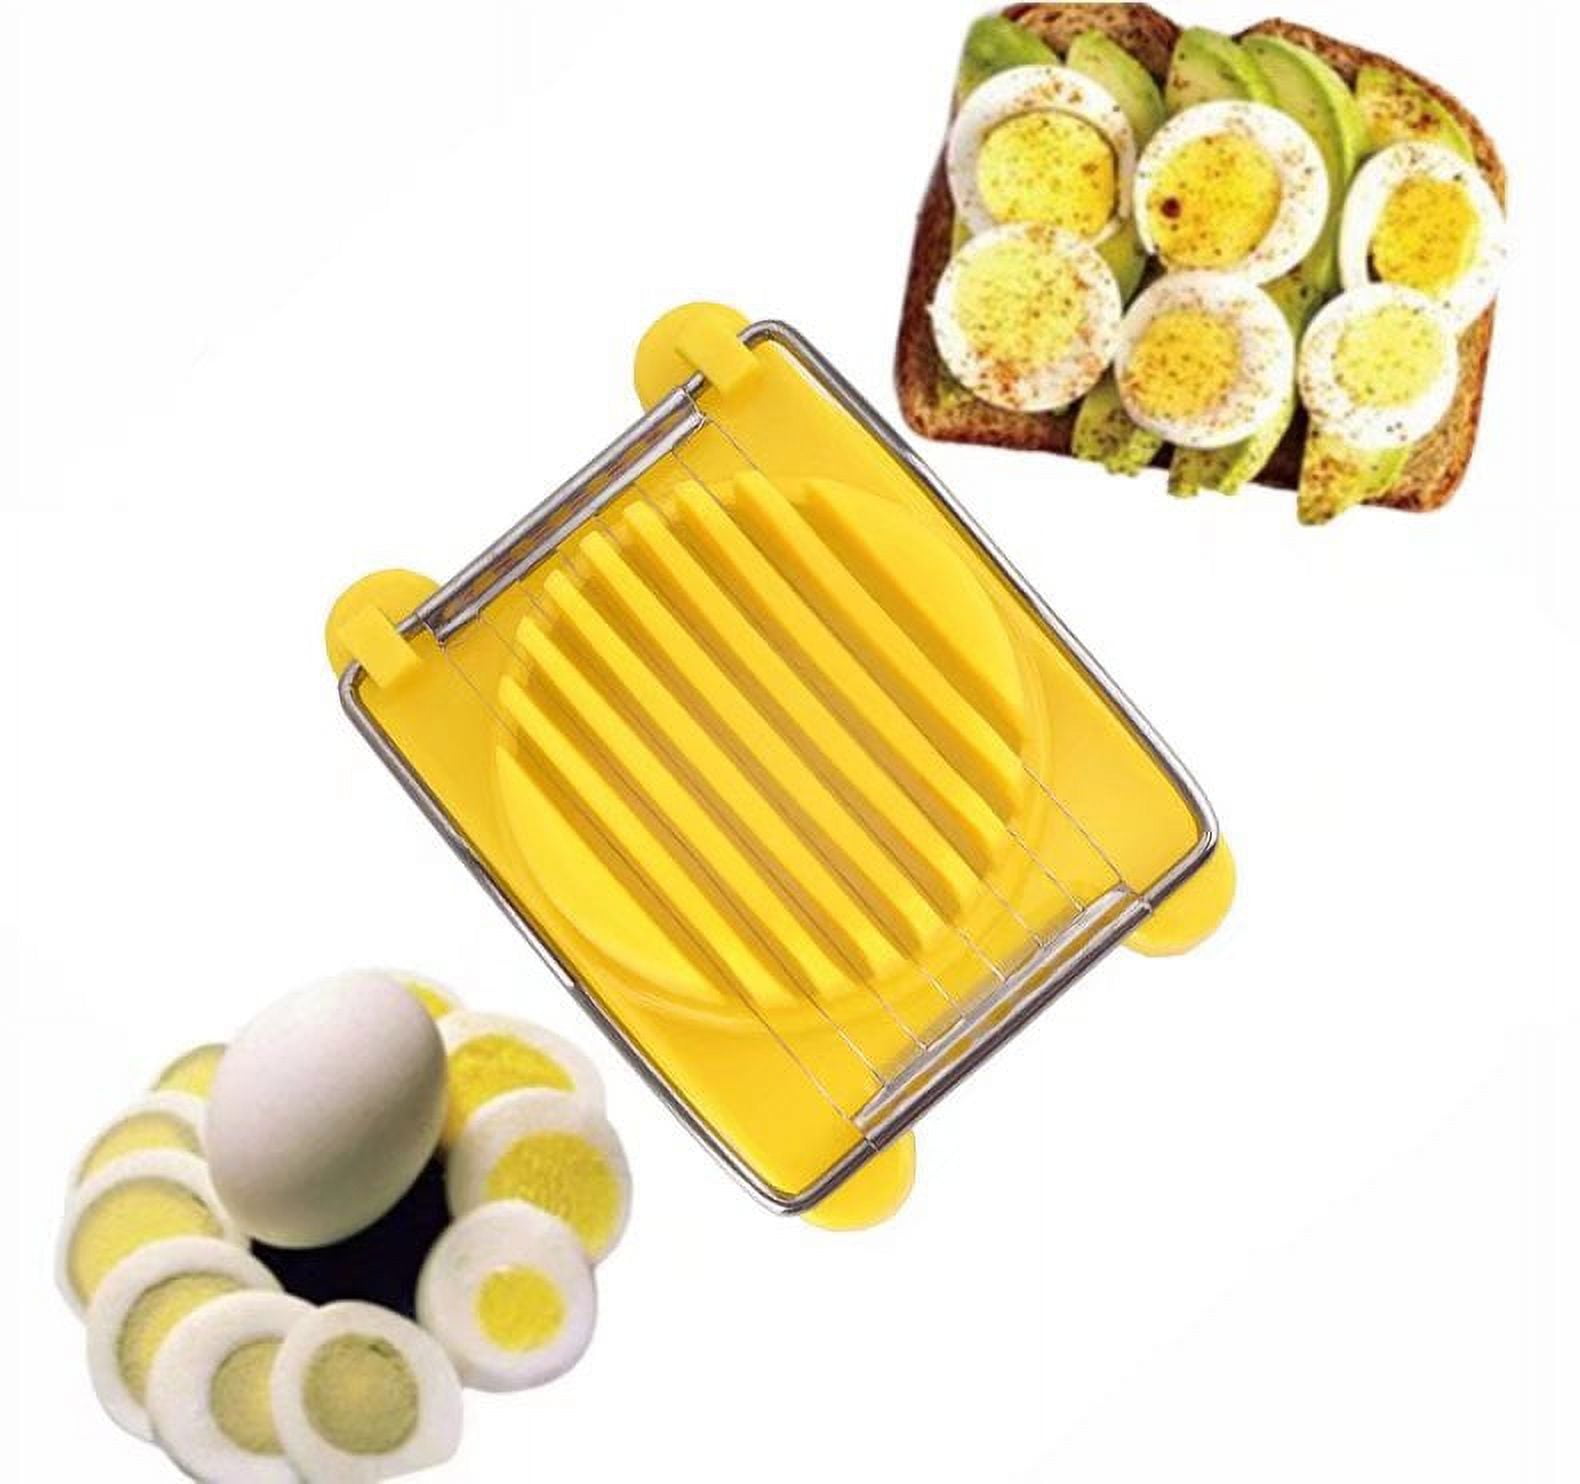 Karcher Egg Cutter Stainless Steel Wire Egg Slicer Portable for Hard Boiled Eggs Home Kitchen New, Other